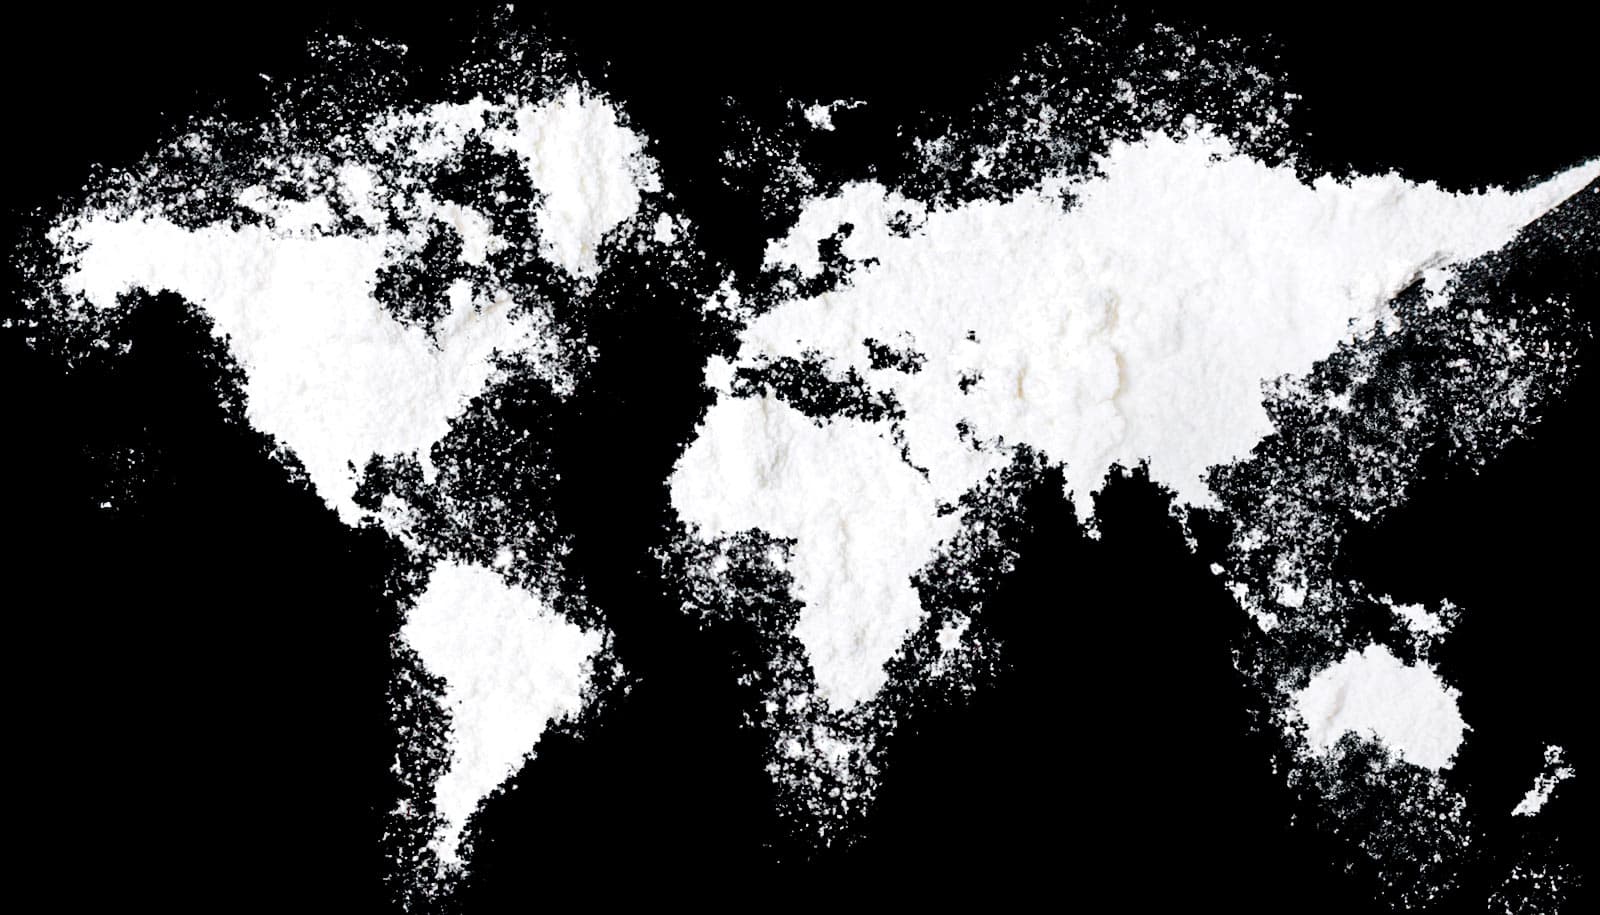 Sewer Water Shows Which Illegal Drugs Countries Use